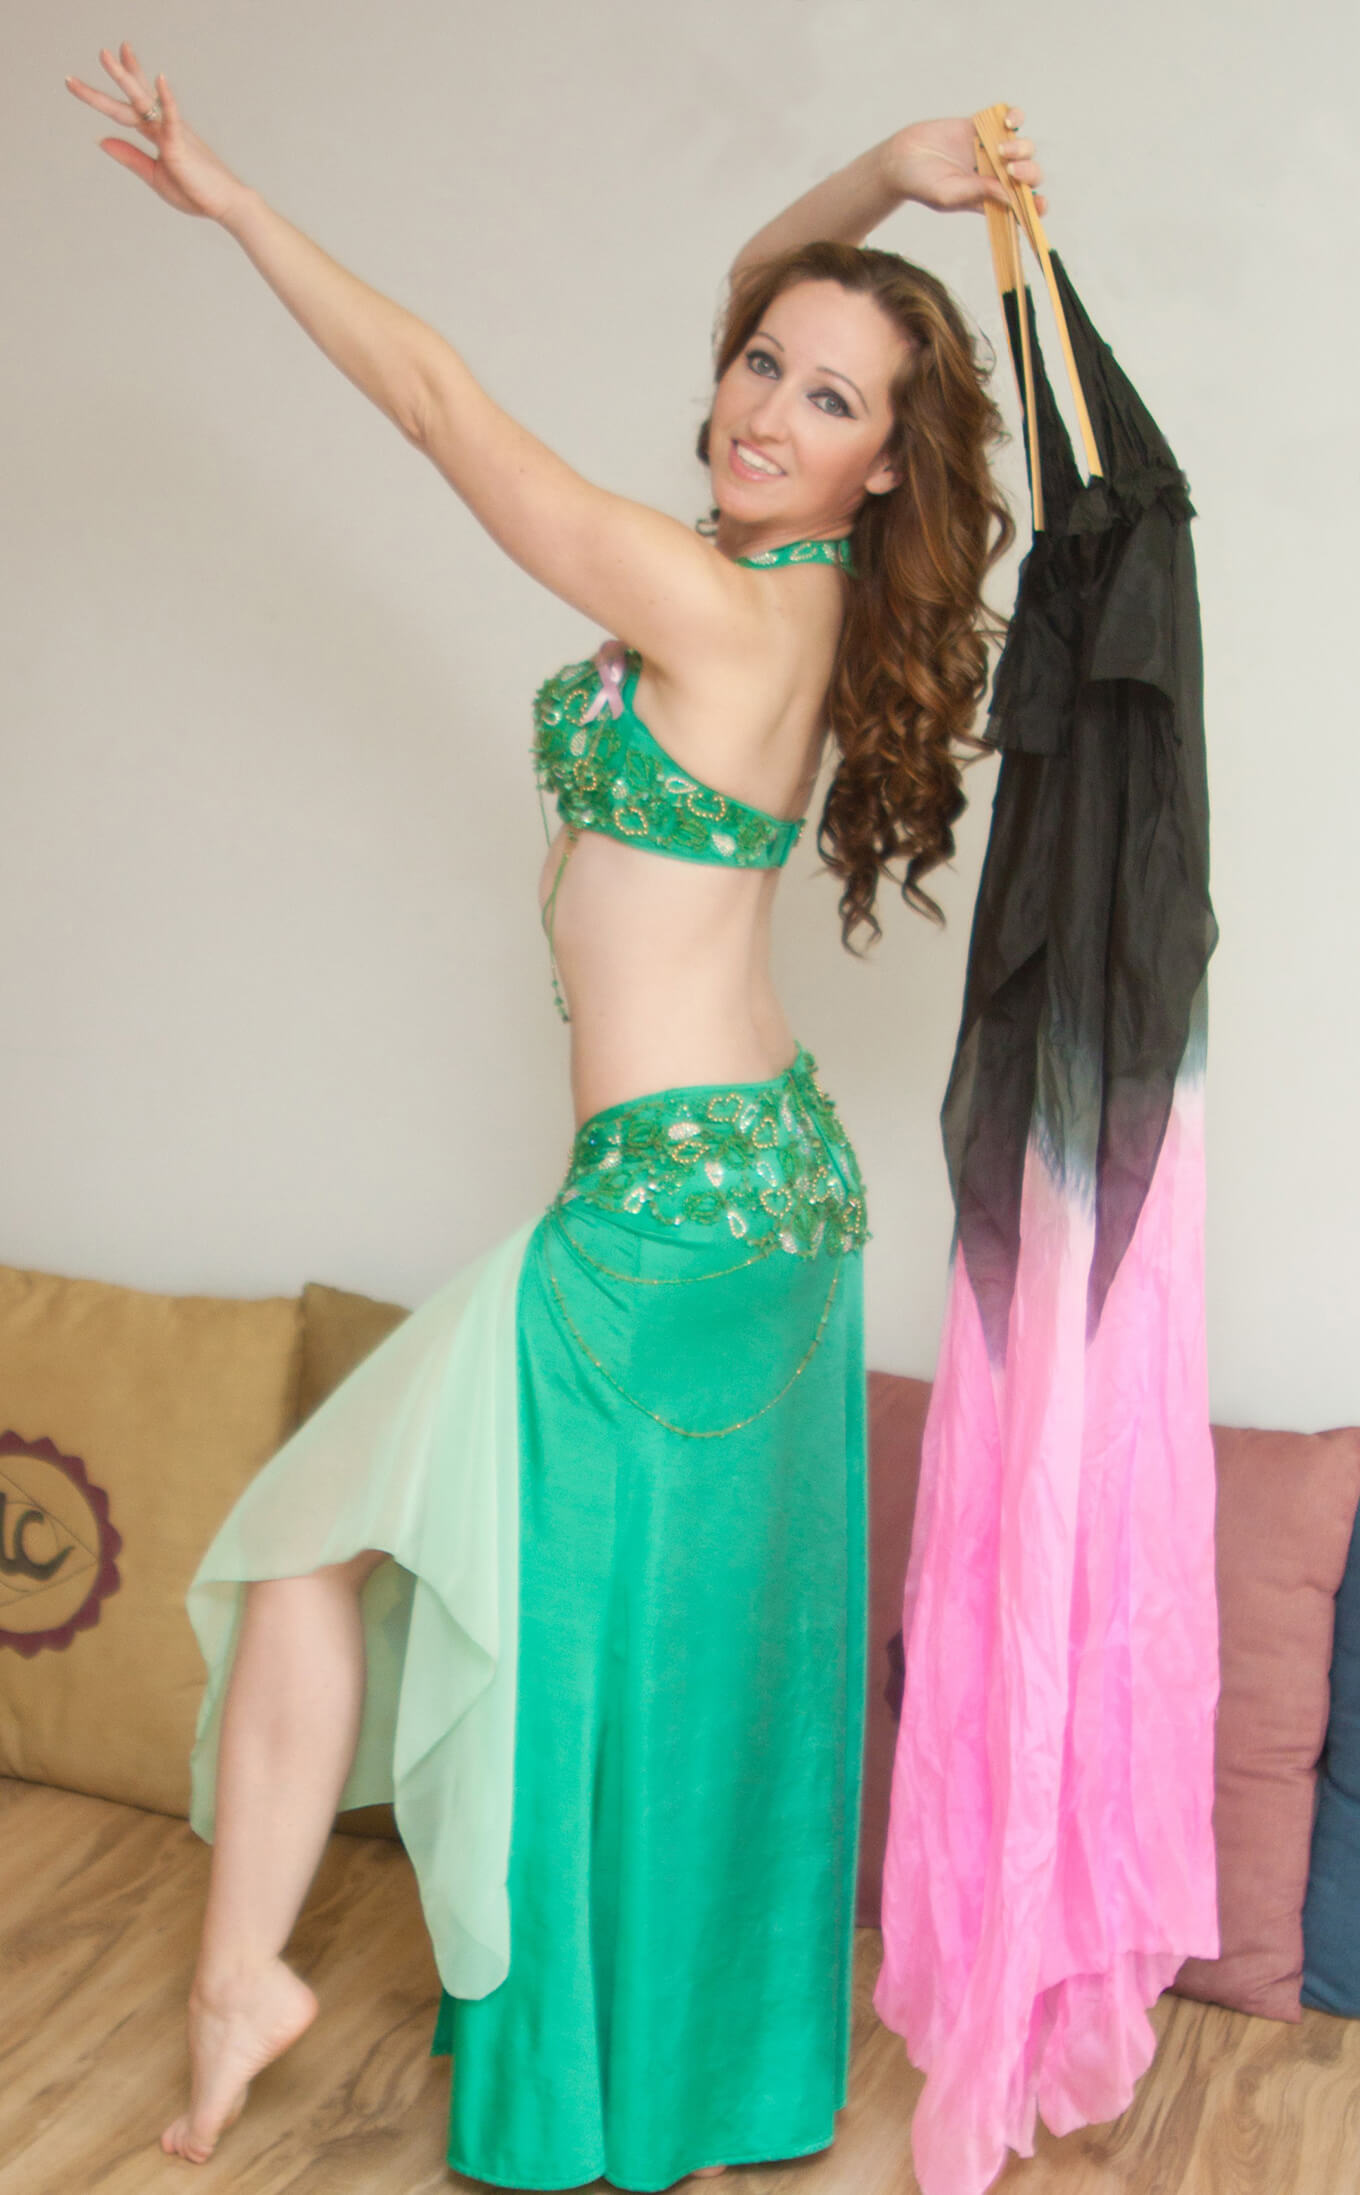 Donna wearing a green belly dance outfit with a fan